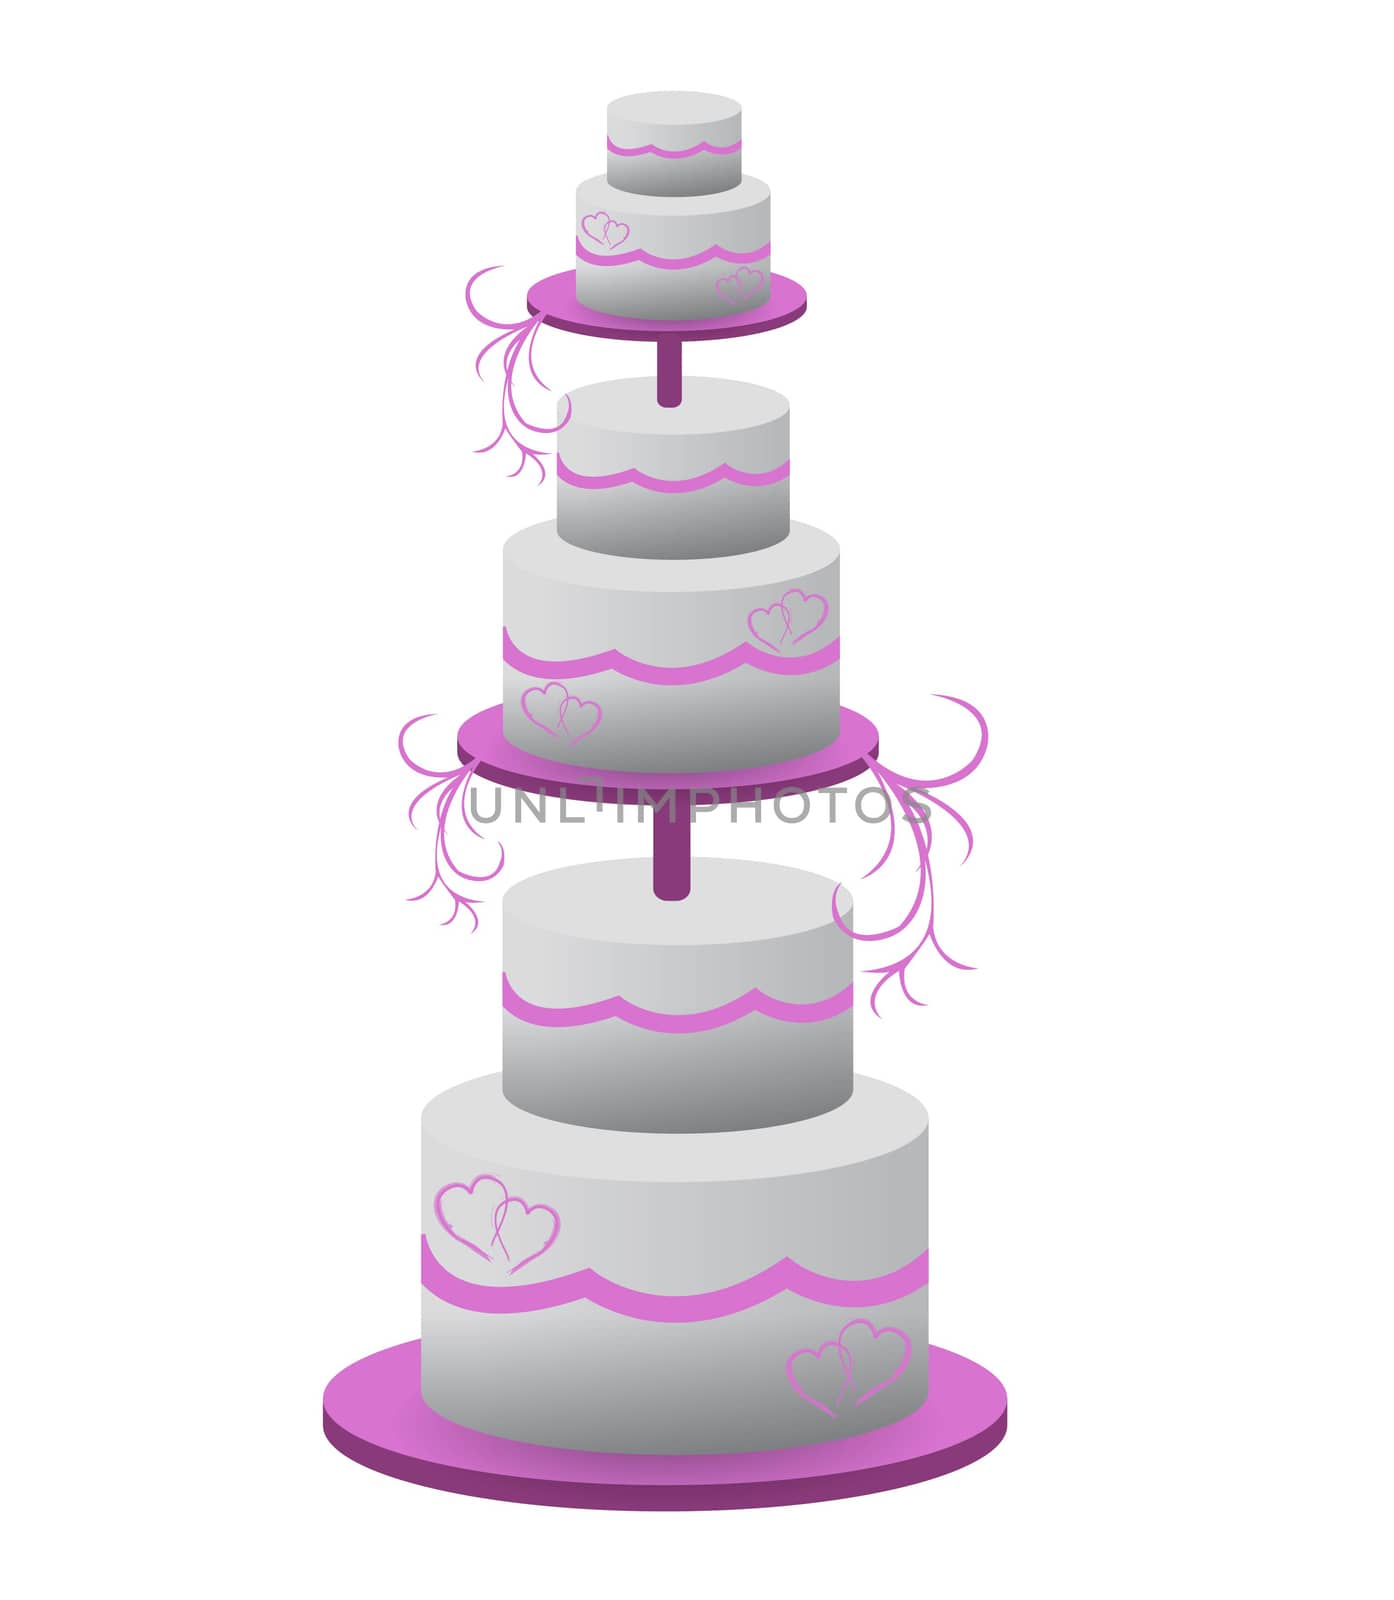 Wedding cake illustration design isolated over a white backgroun by alexmillos